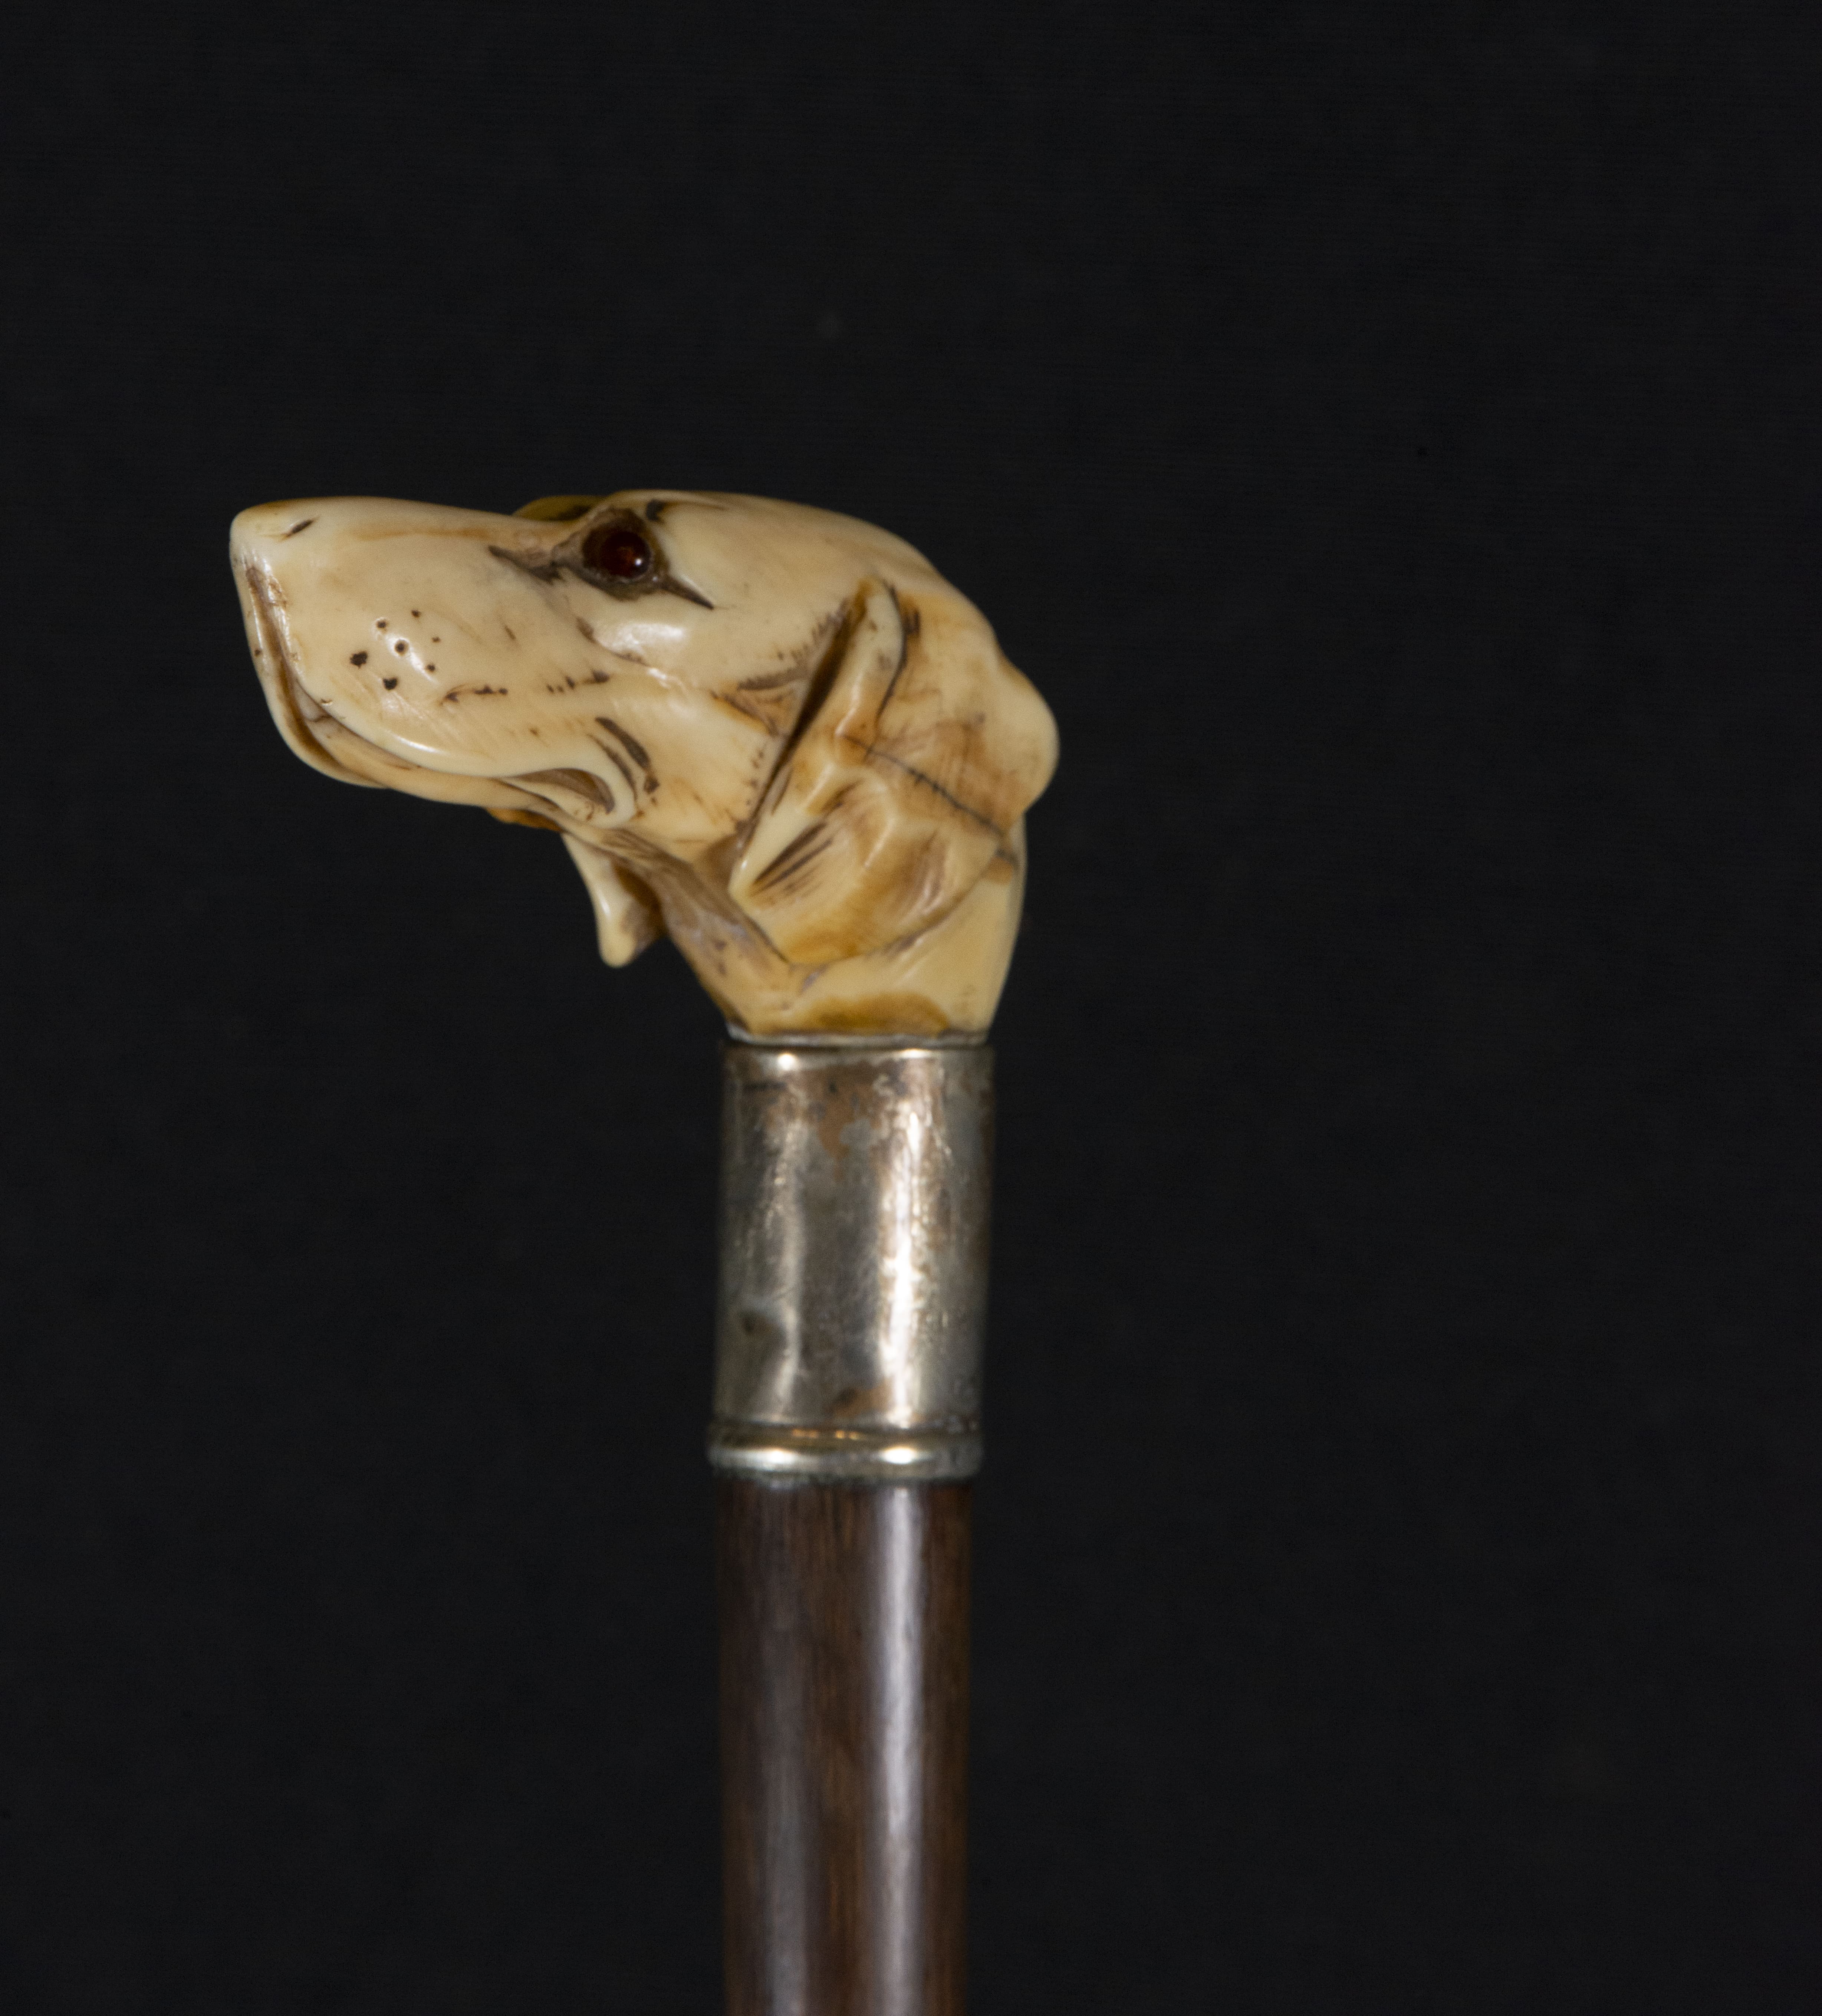 Victorian cane in ebony with embossed silver handle with dog's head carved in deer antler, 19th cent - Image 4 of 4